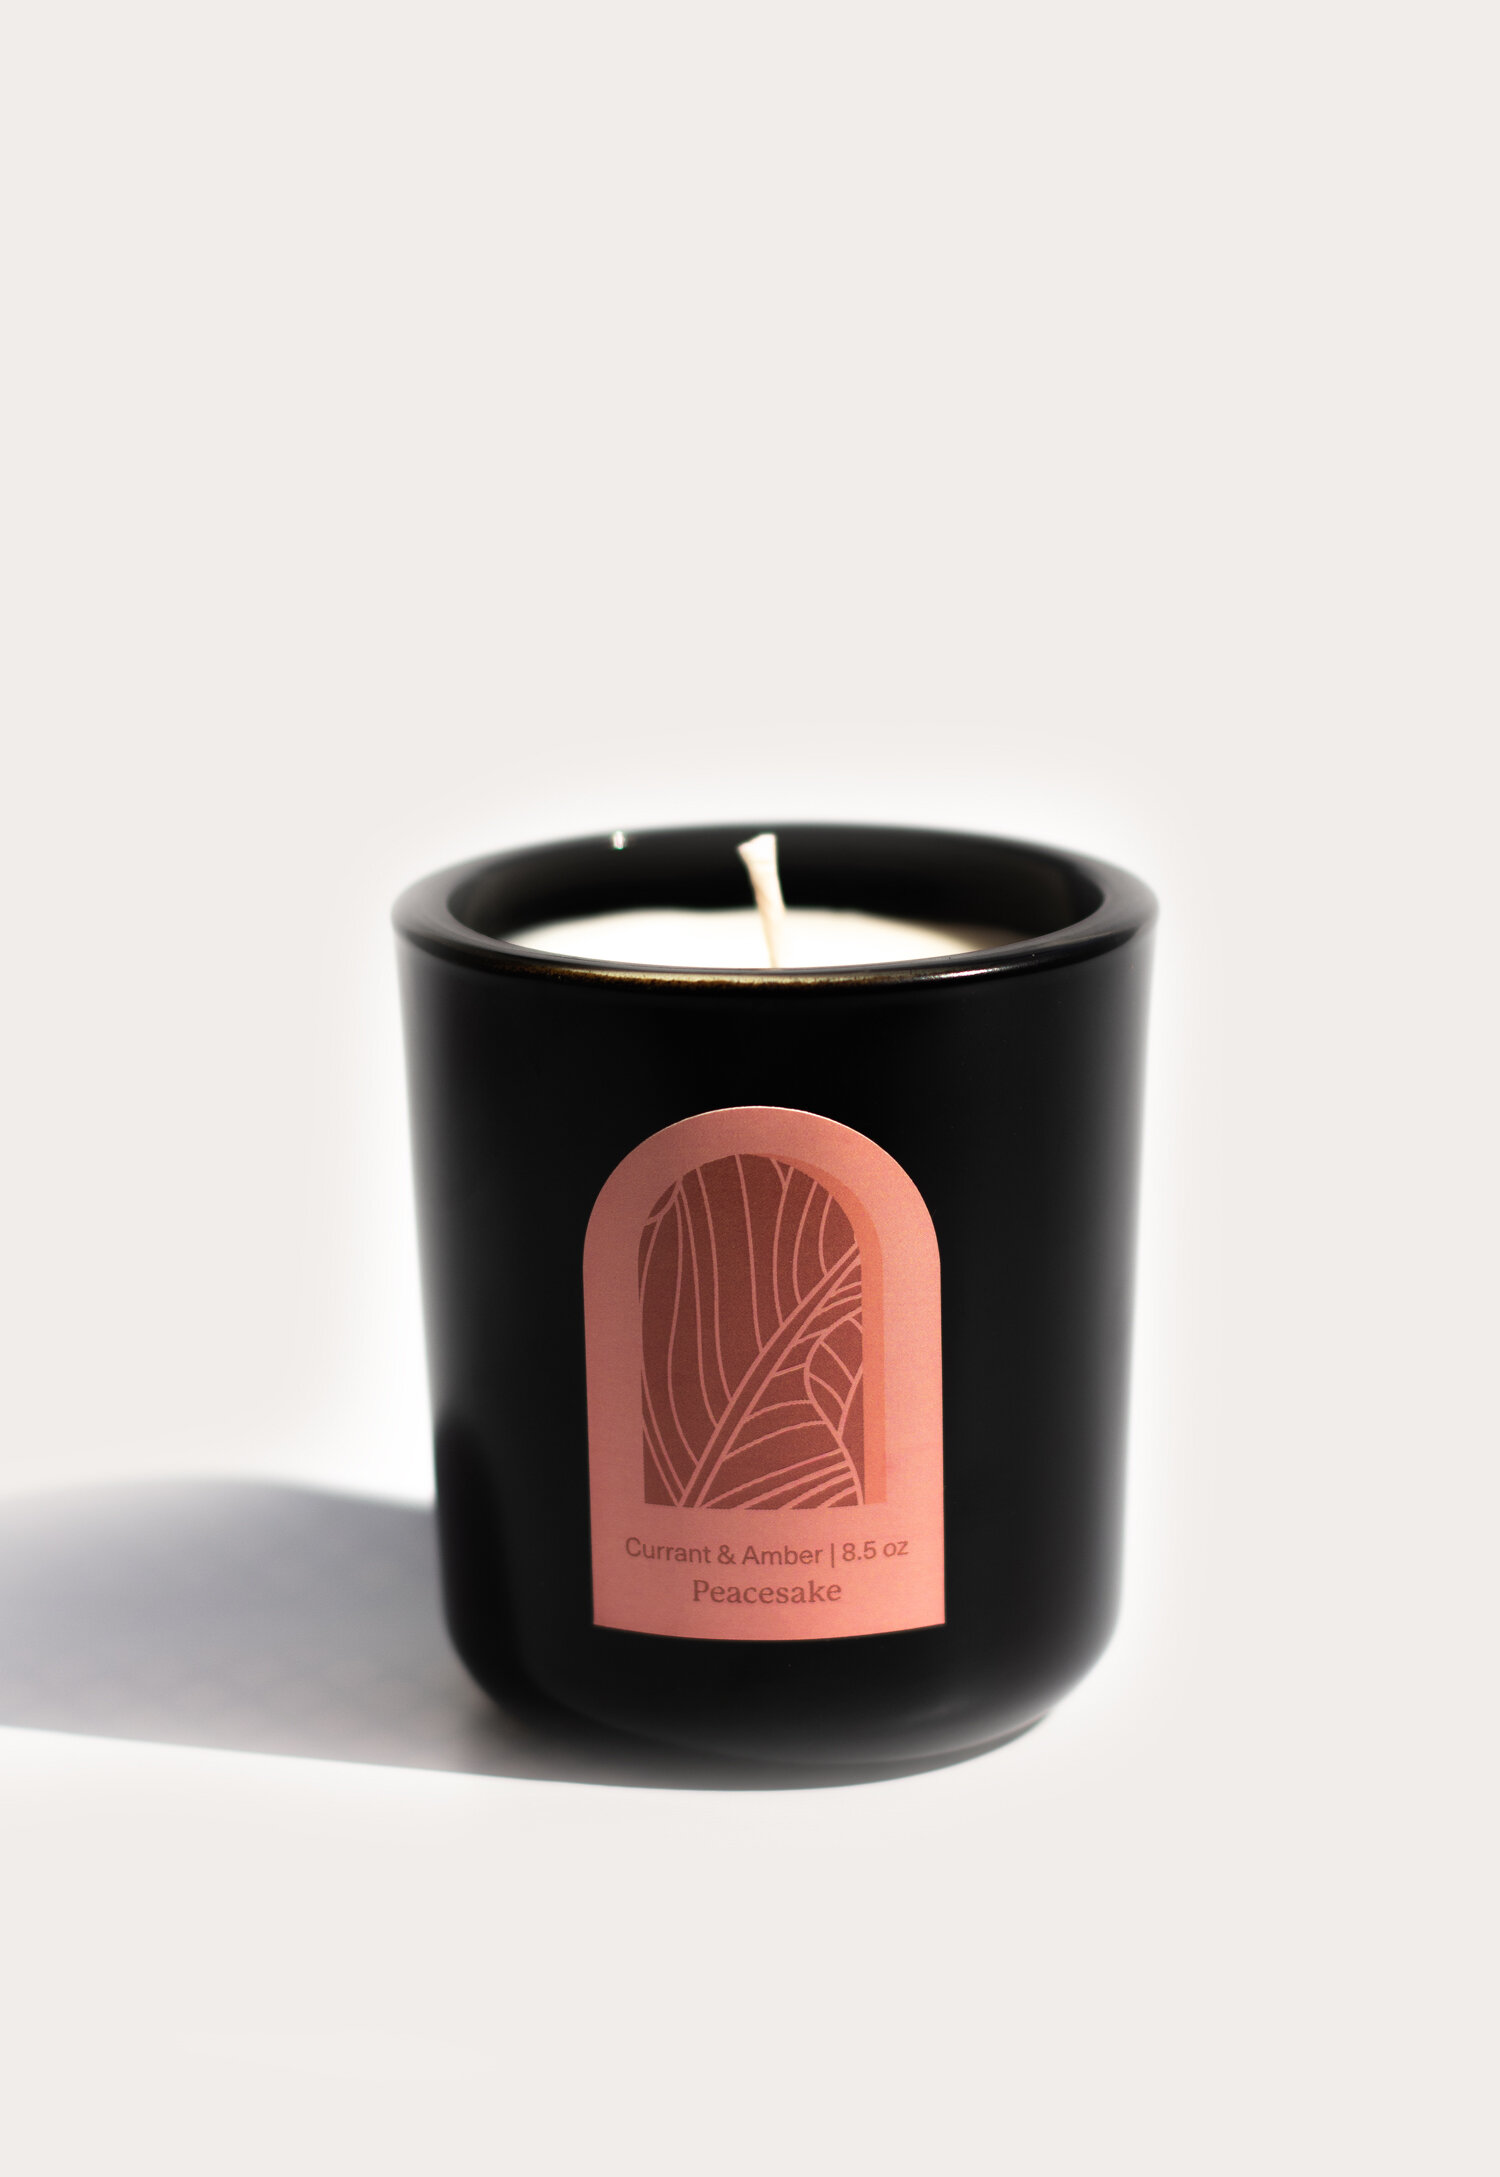 Currant & Amber soy candle, phthalate-free, and a cotton wick ...